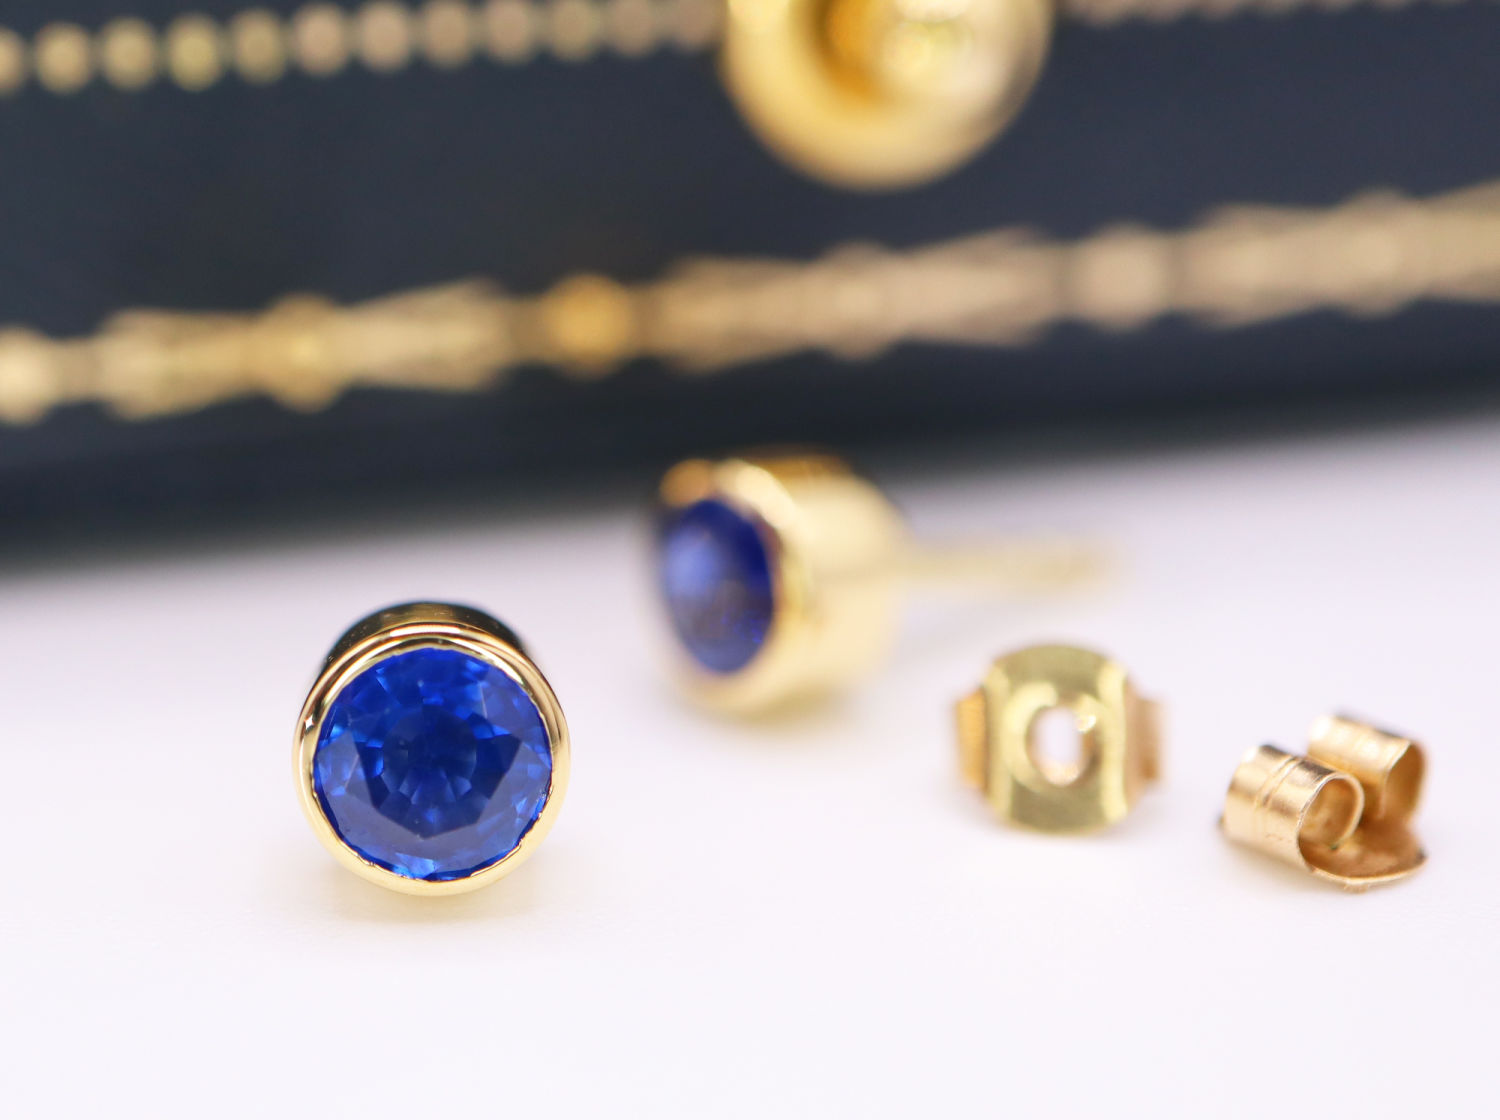 *BEAUTIFUL* 1.30CT BRIGHT BLUE SAPPHIRE STUD EARRINGS SET IN 18K YELLOW GOLD - Image 2 of 4